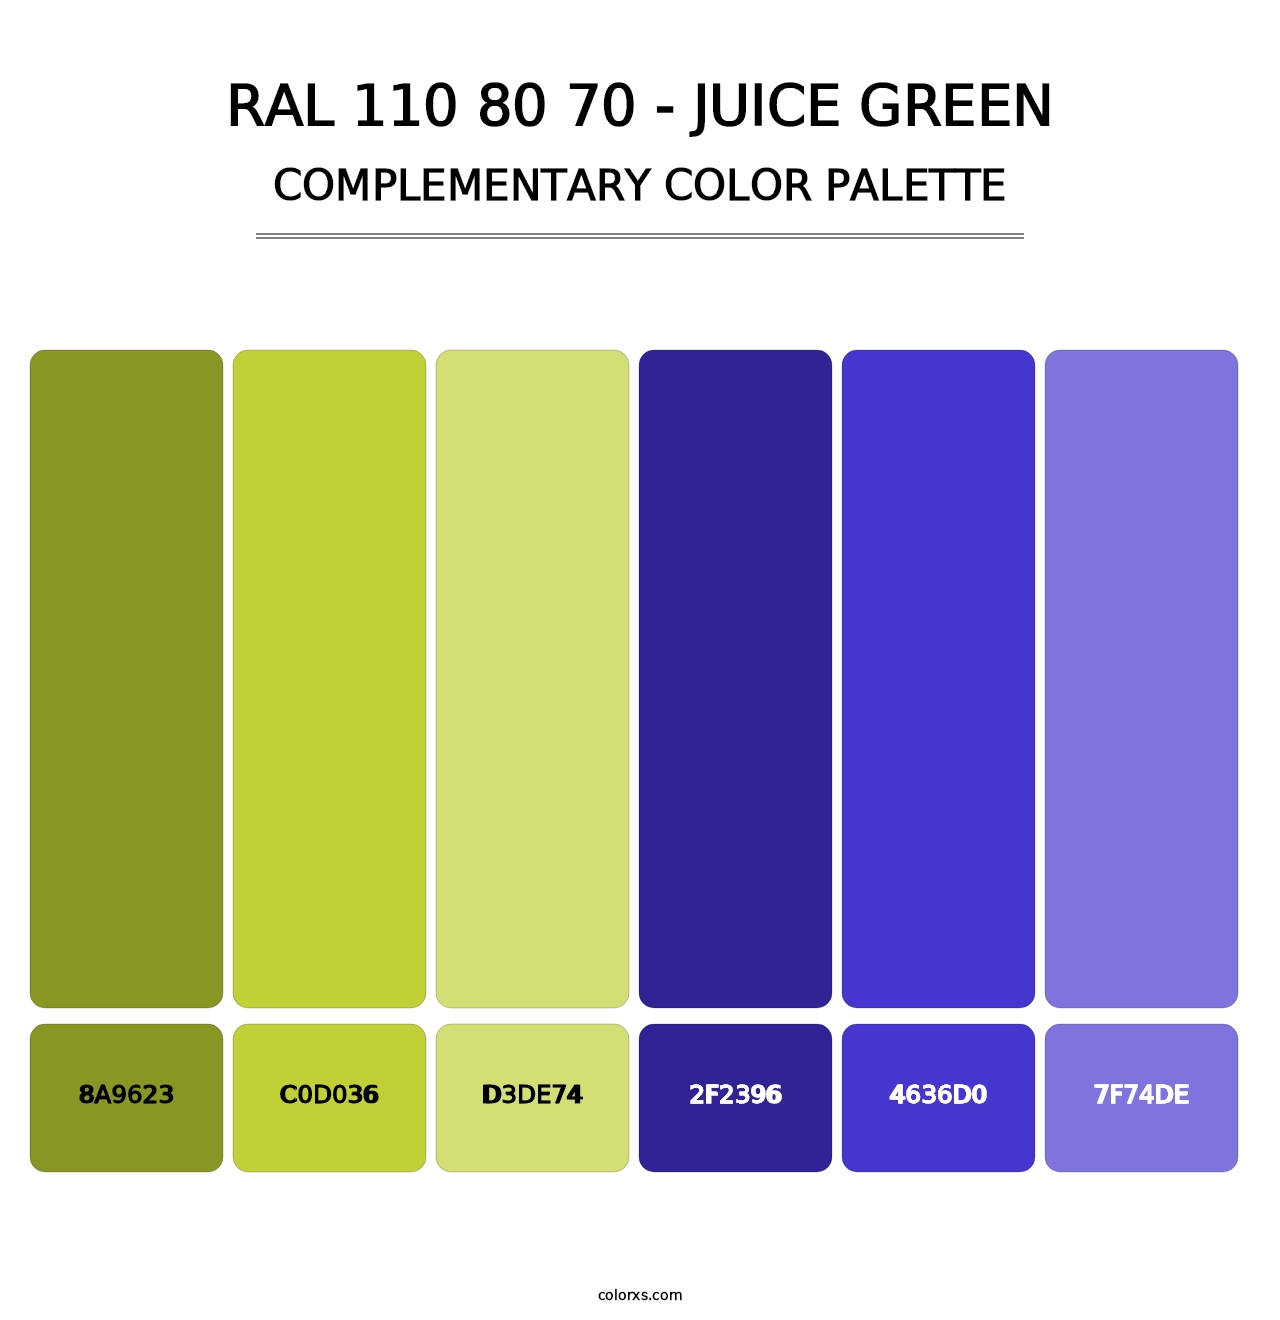 RAL 110 80 70 - Juice Green - Complementary Color Palette